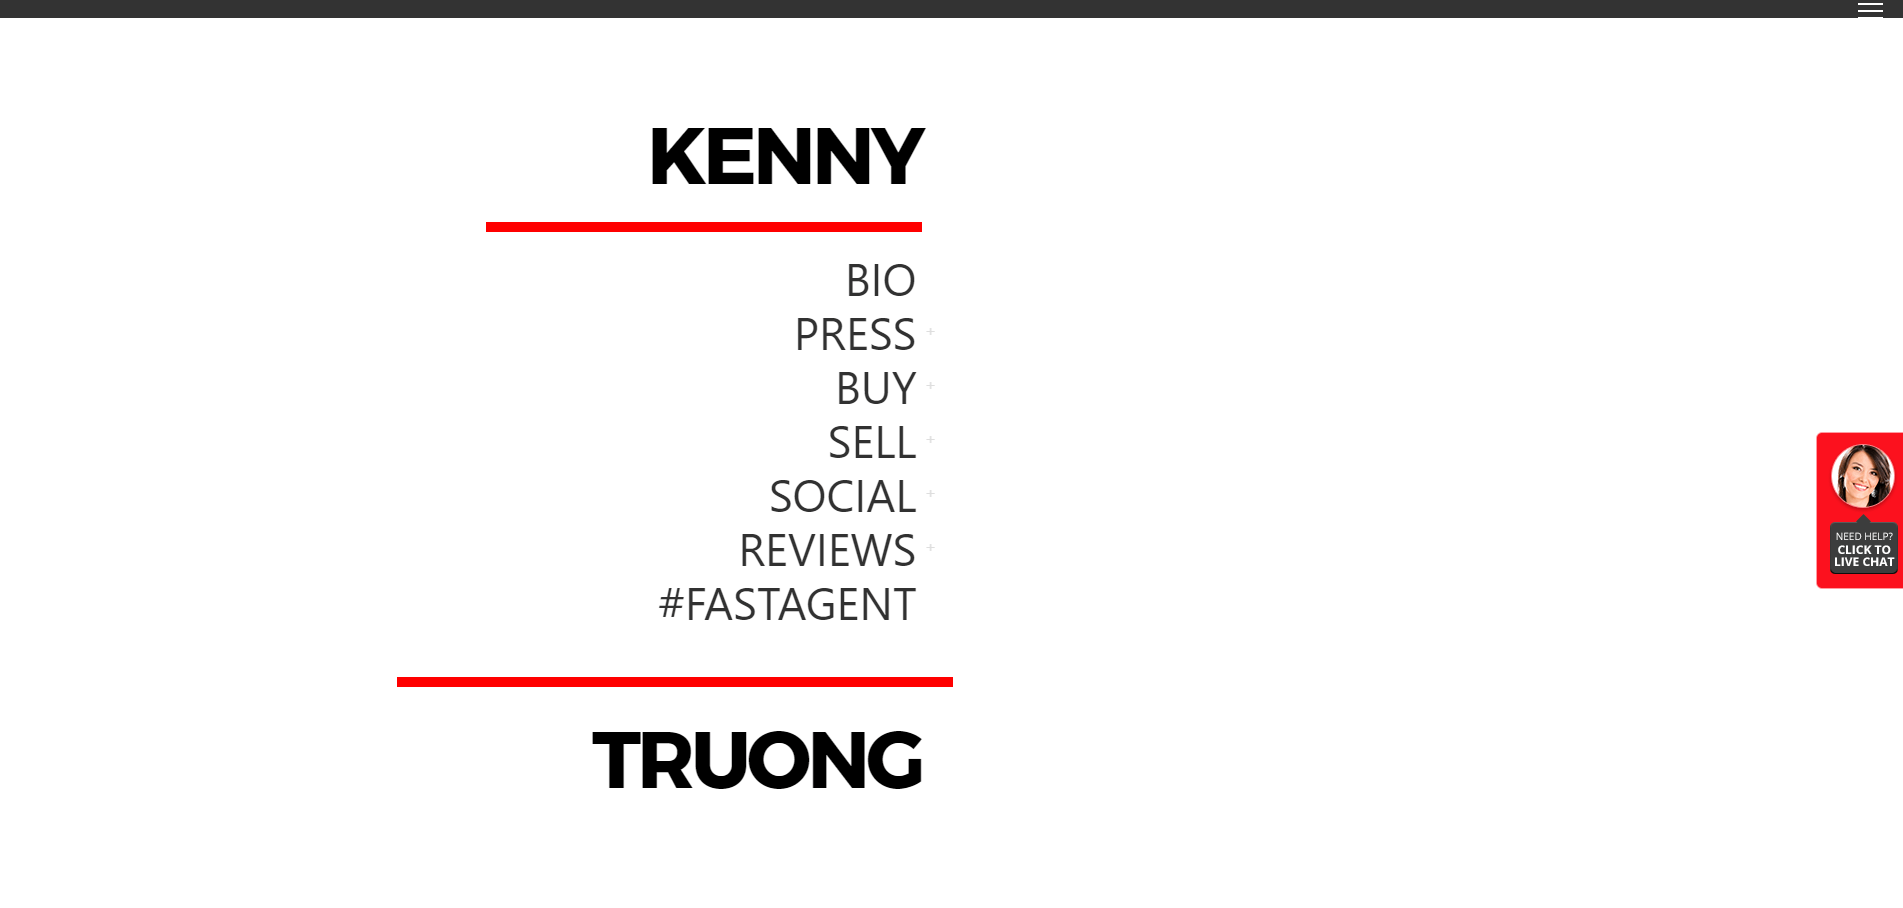  Awesome!  Looking for the best real estate websites? Here are 101 of them.  Each site is ranked 1-101 with a description and review.  Here's kennytruong.com.  Is your site on the list? 